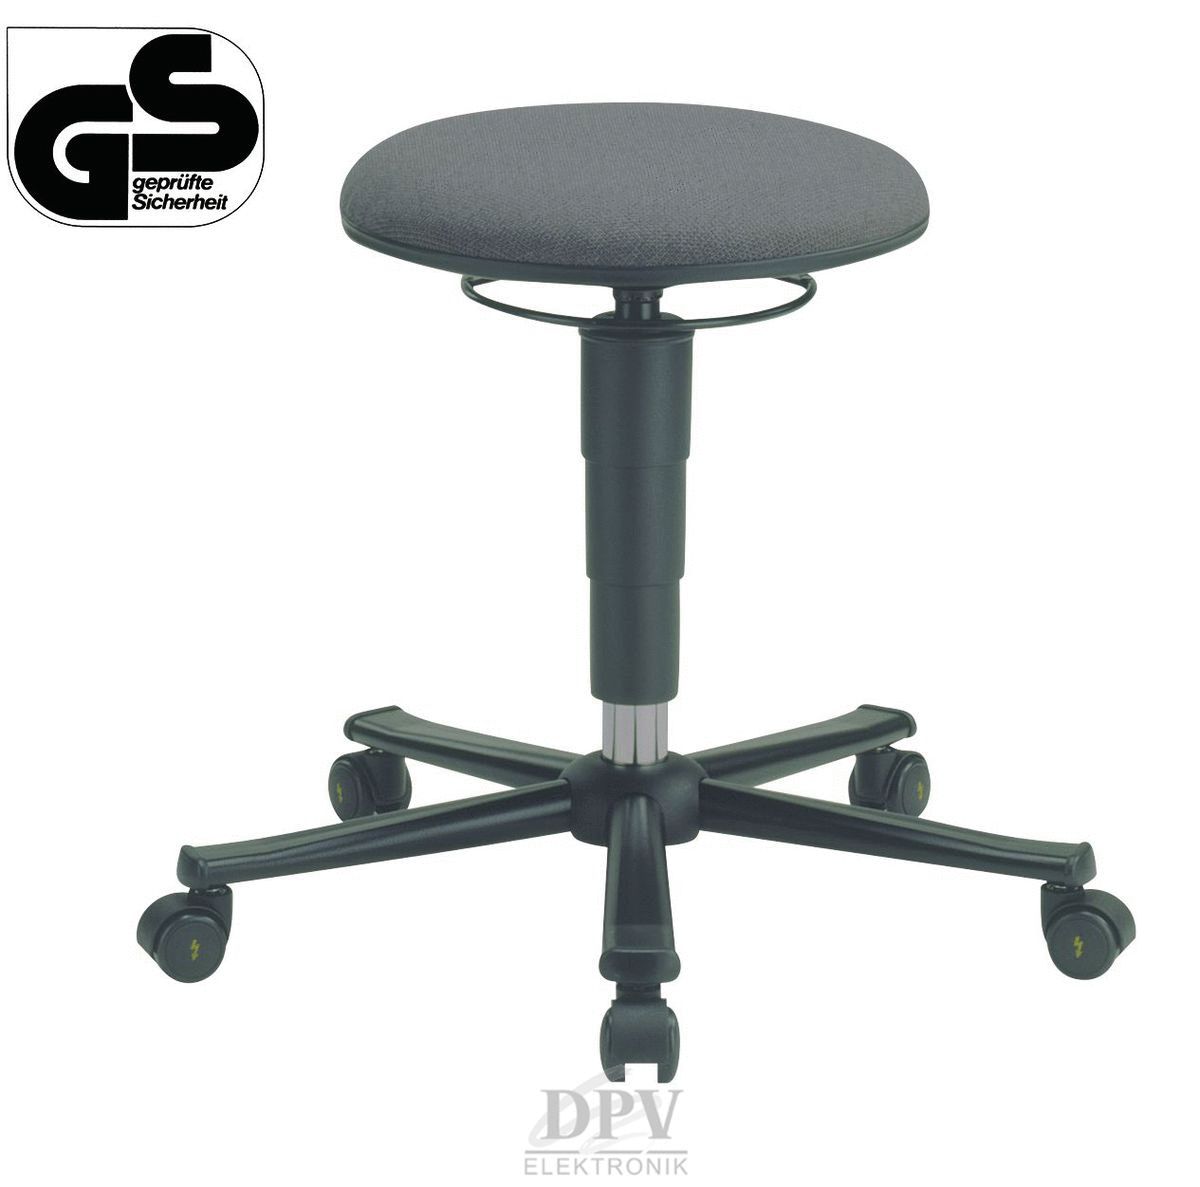 Stools / Standing aids